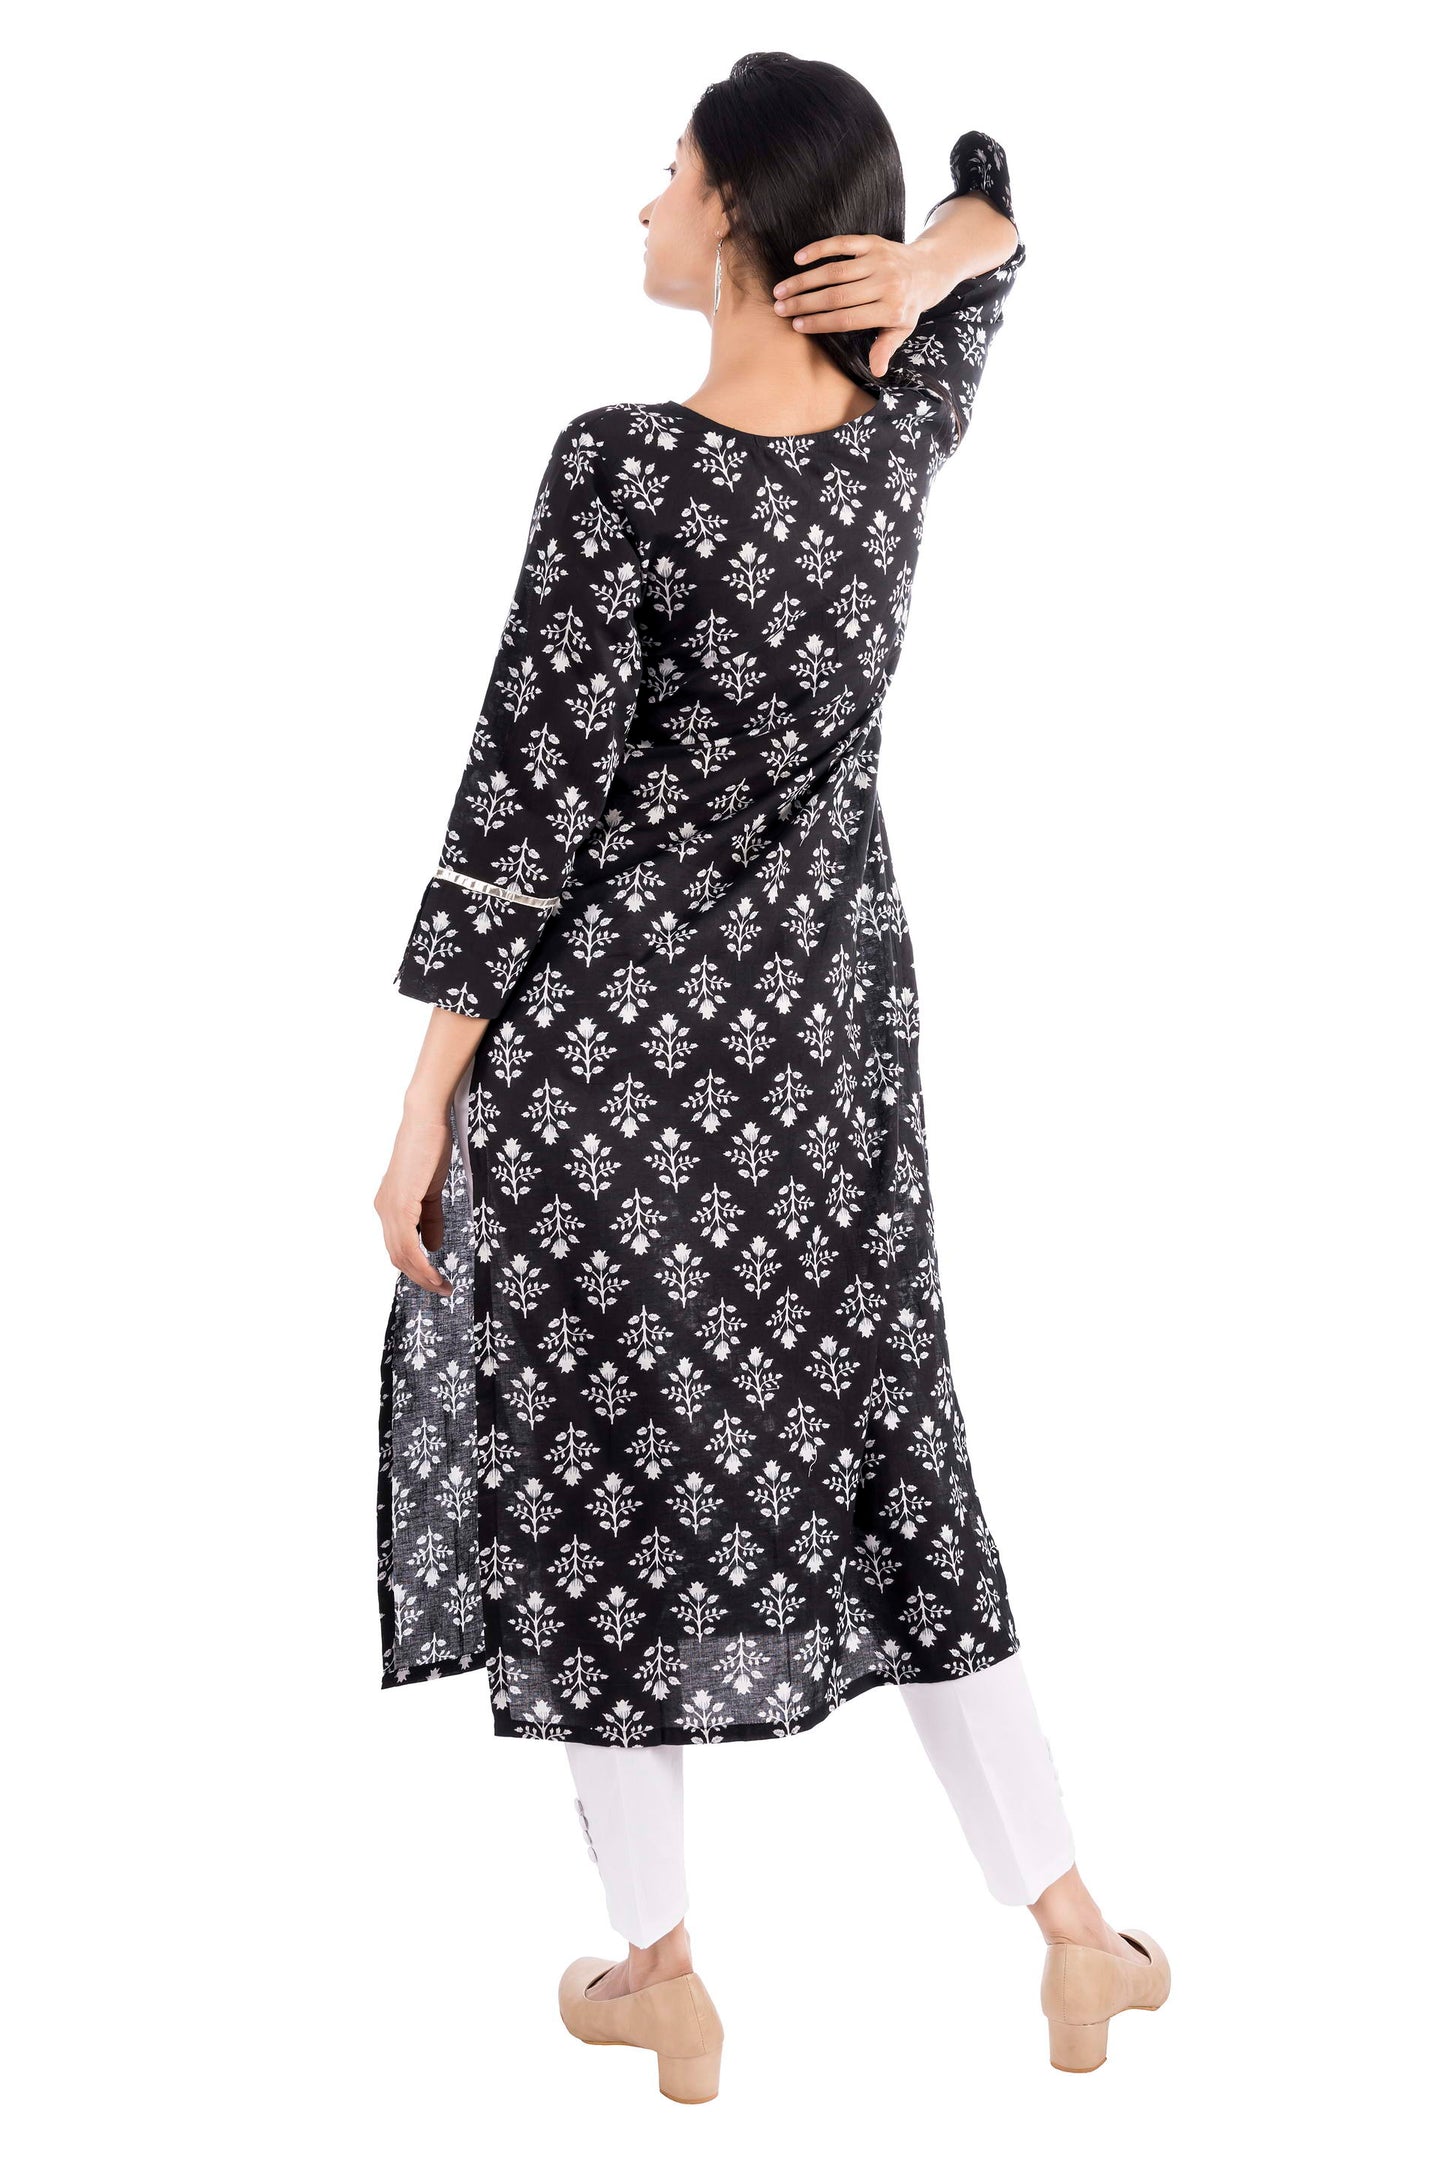 MAGNETISM Cotton Fabric Floral Printed Round Neck Kurti